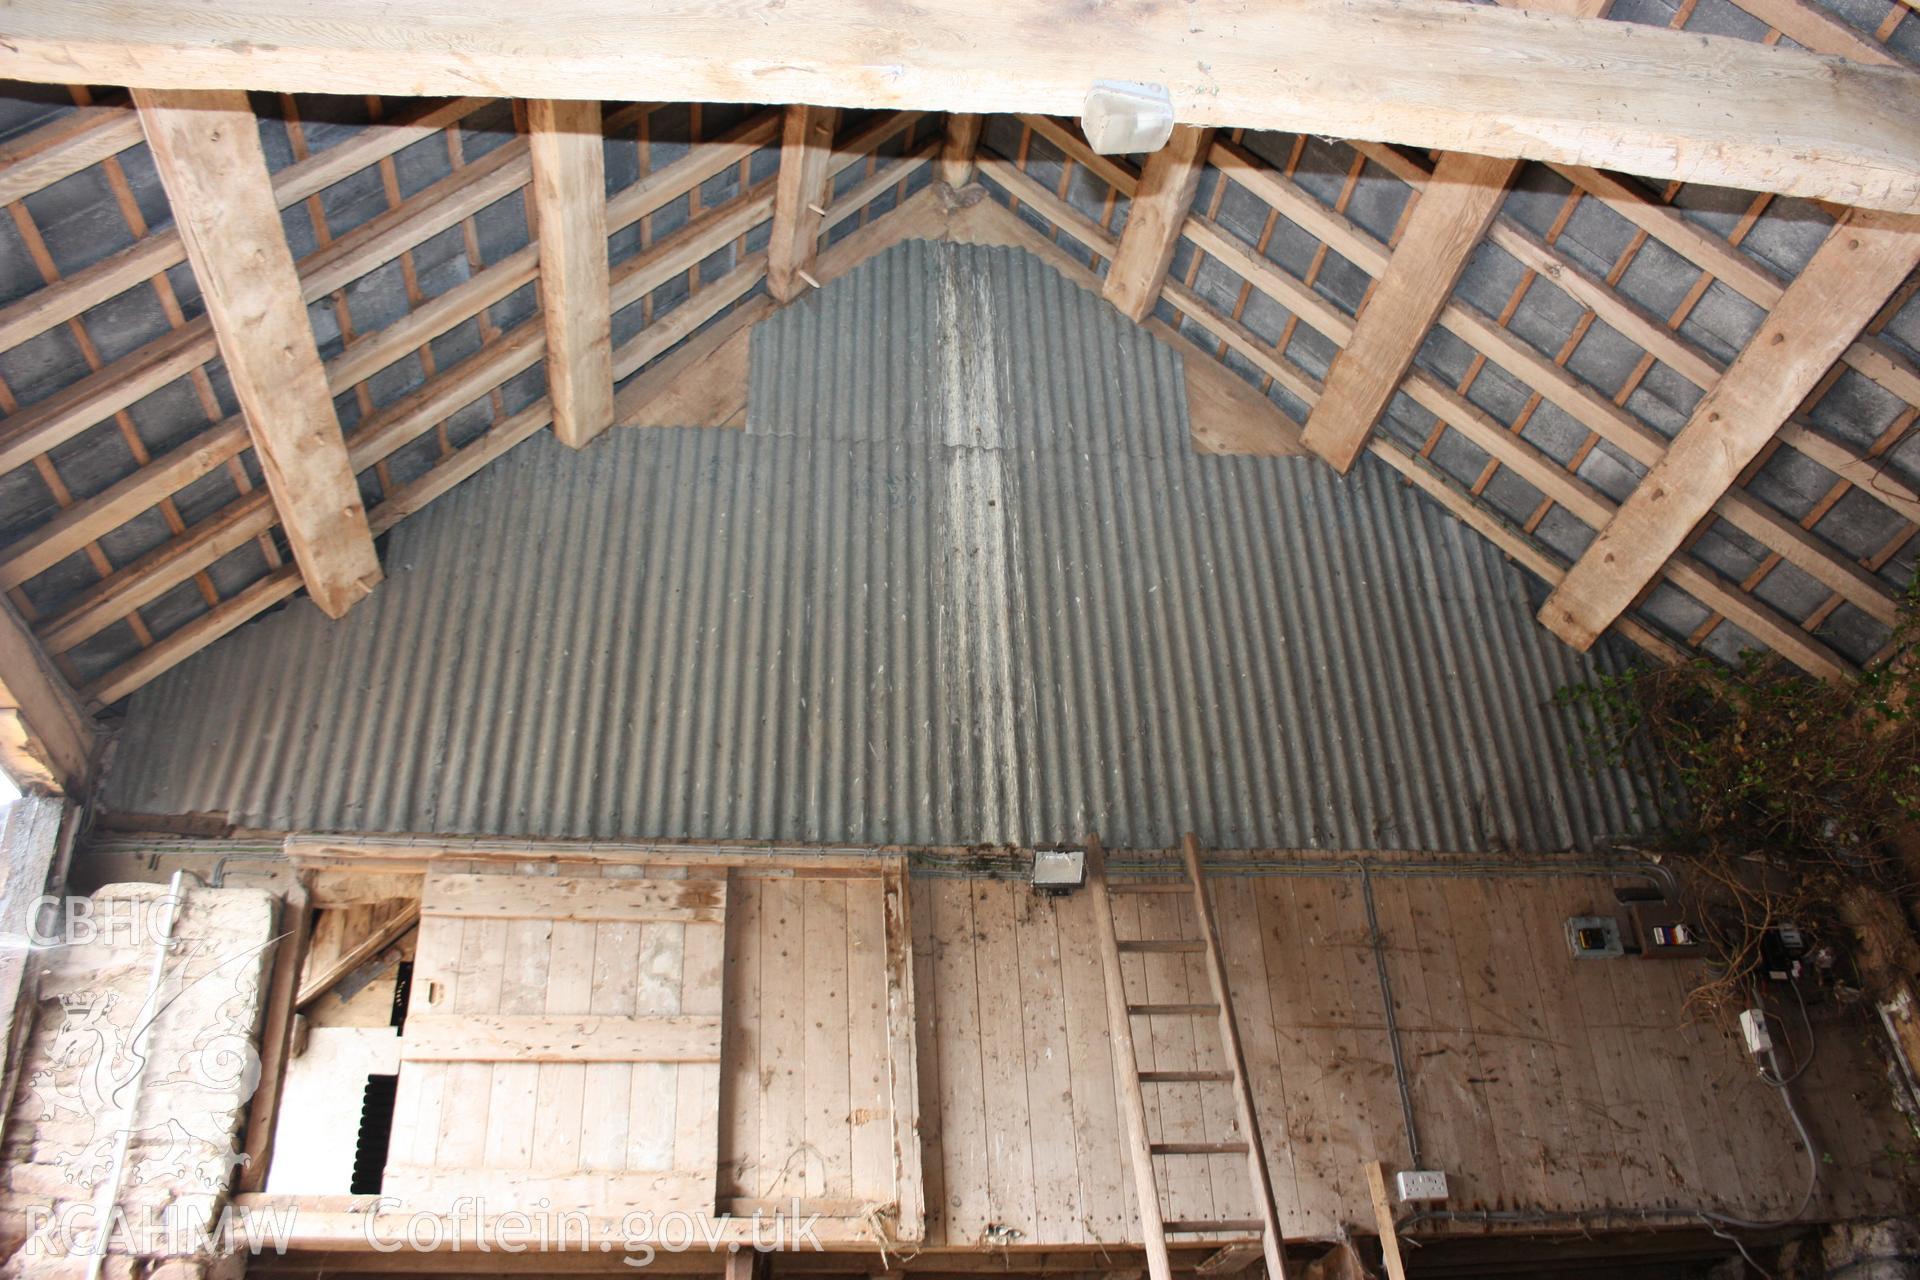 Corrugated iron roof and wooden beams and panelling at Marian Mawr. Photographic survey of Marian Mawr in Cwm, Denbighshire by Geoff Ward on 20th August 2010.